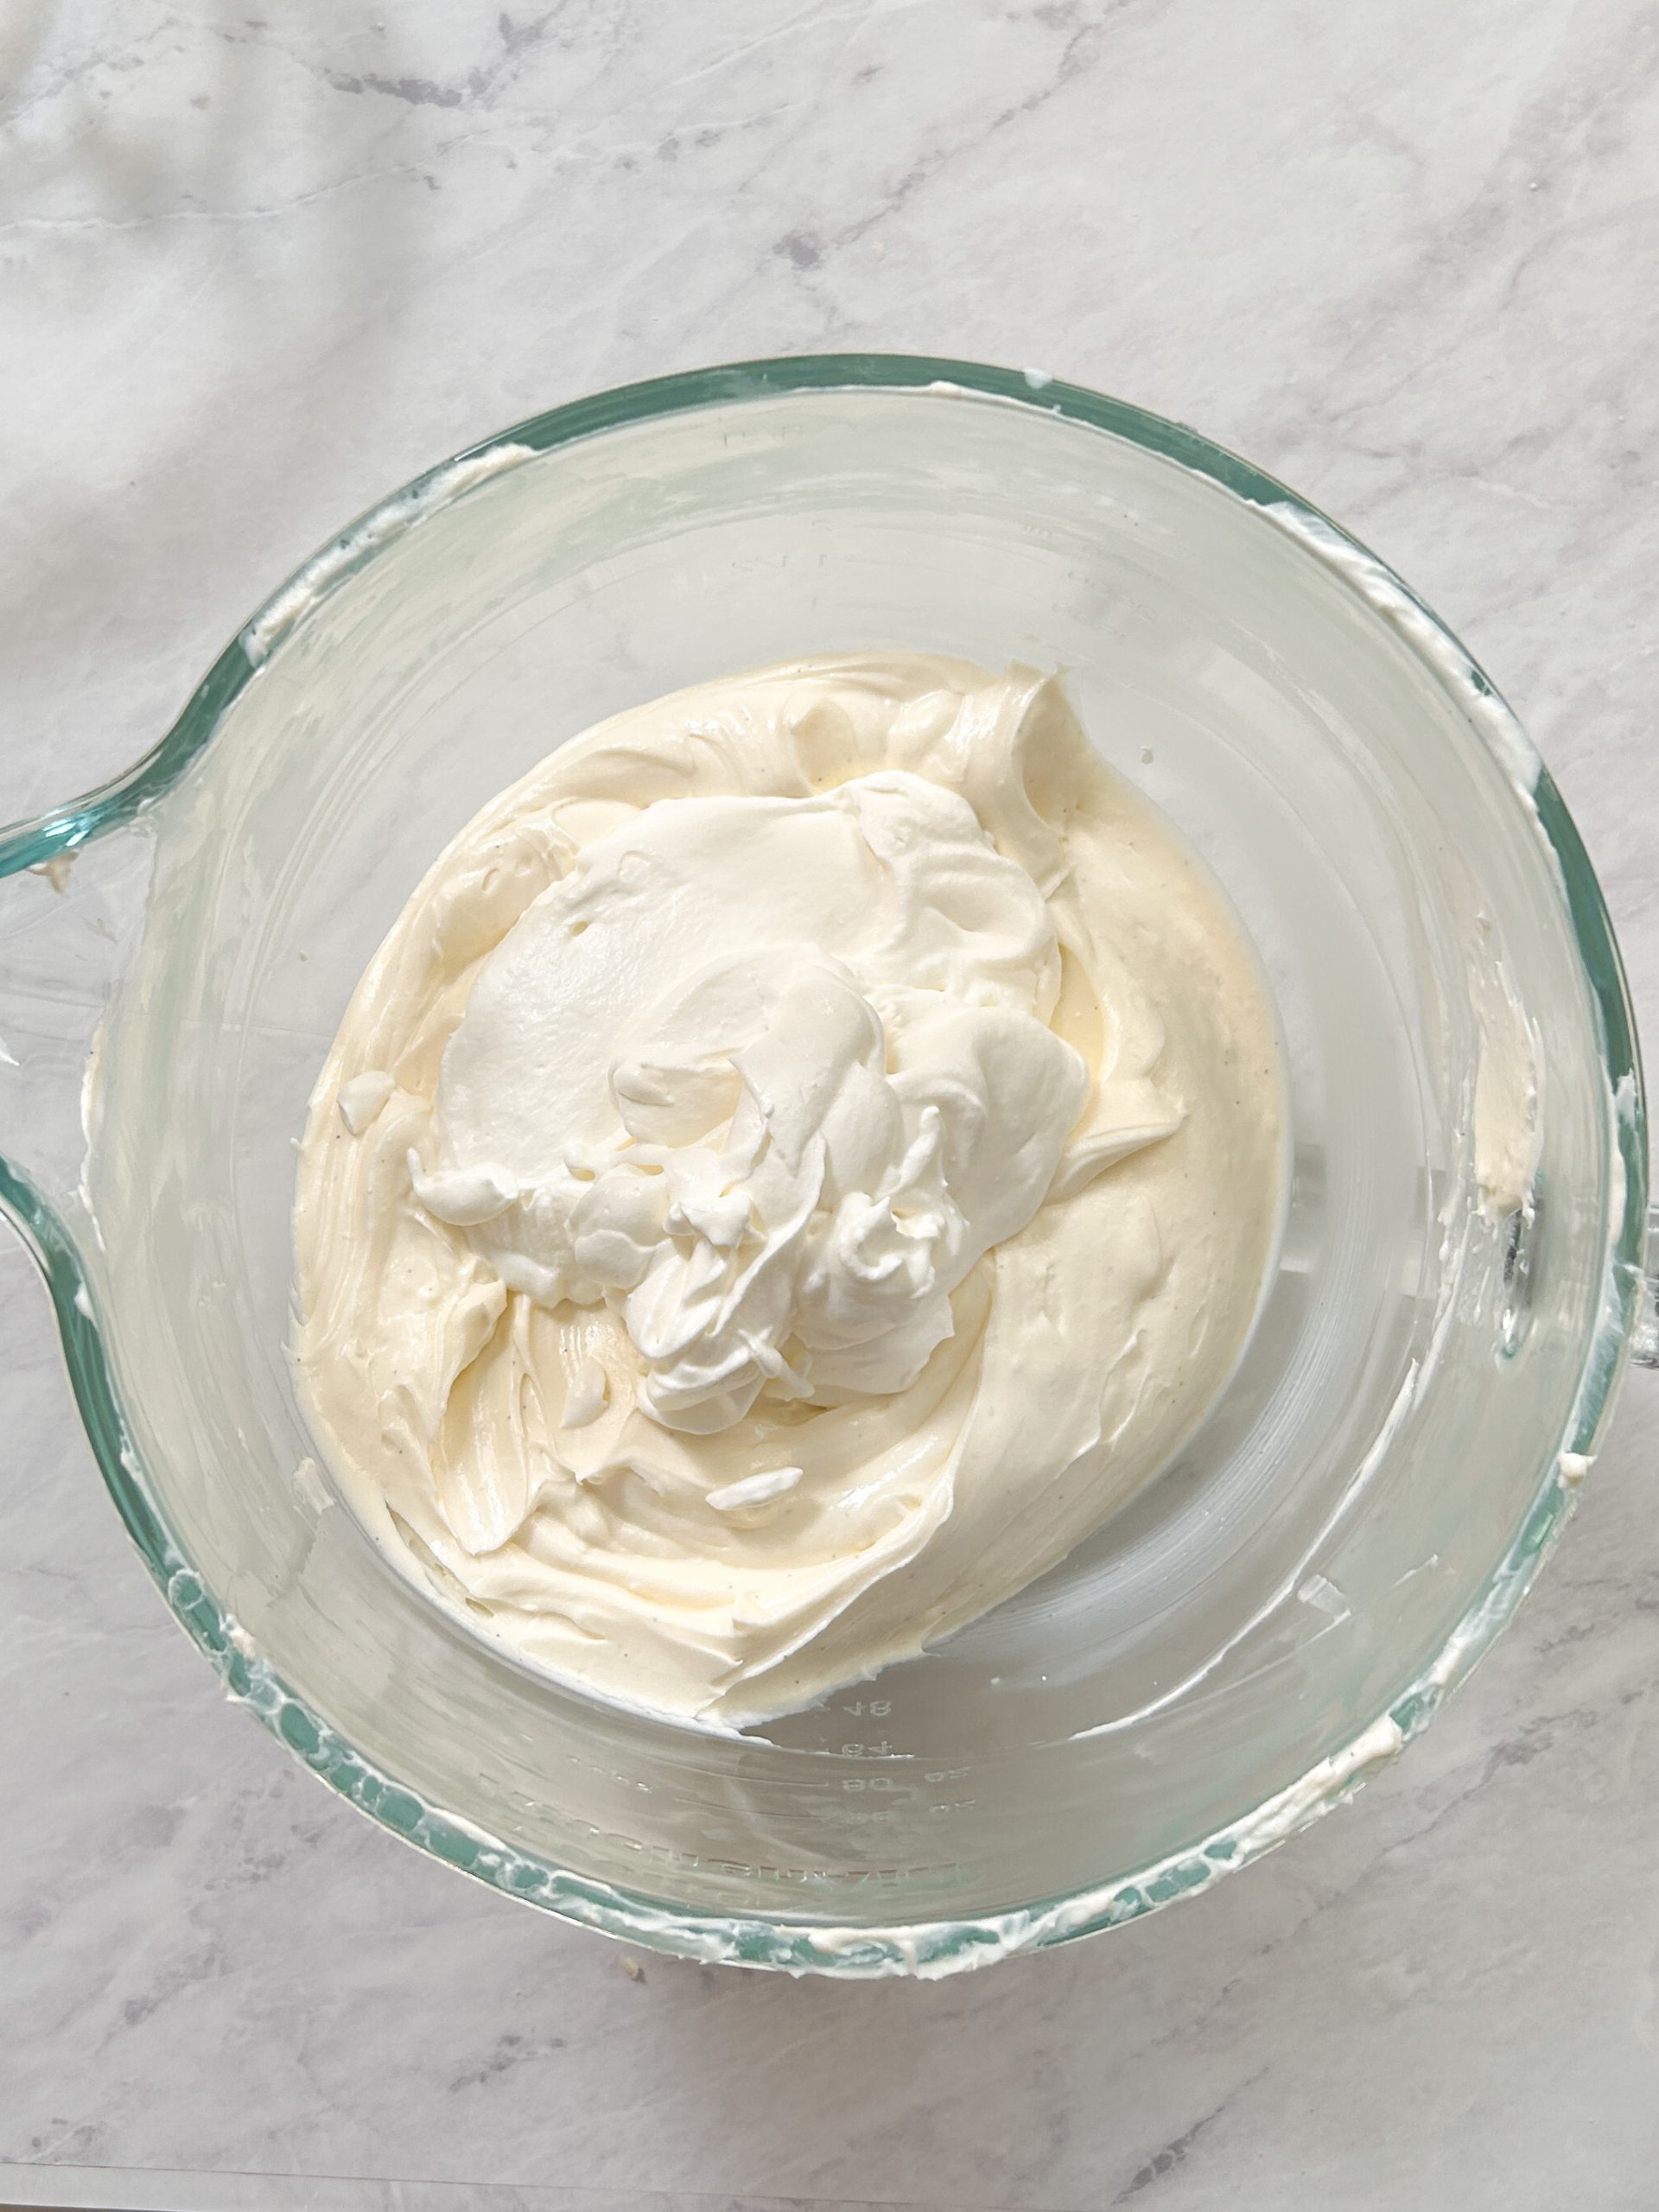 sour cream and lemon juice added to cream cheese and sugar mixture in a glass bowl